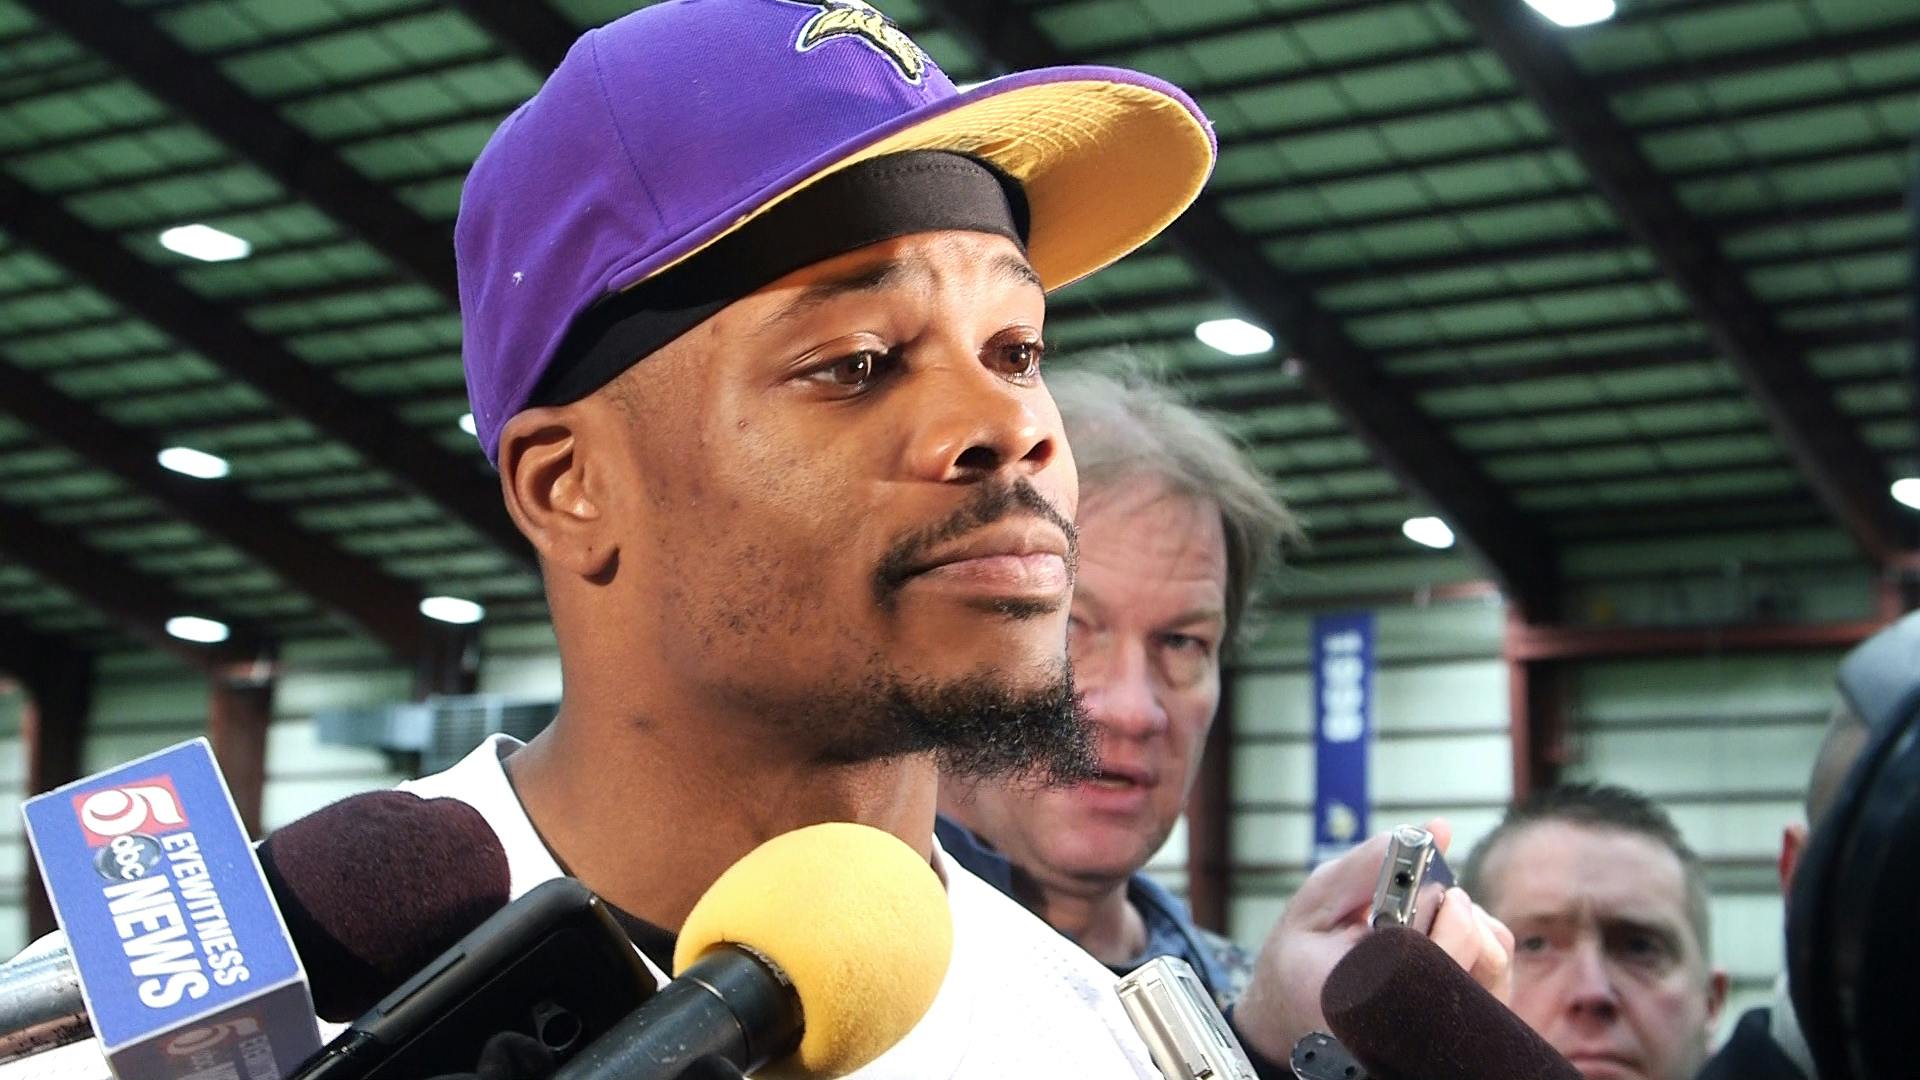 Vikings wide receiver Jerome Simpson apologize to players and fans after he was arrested for suspicion of drunken driving Saturday morning